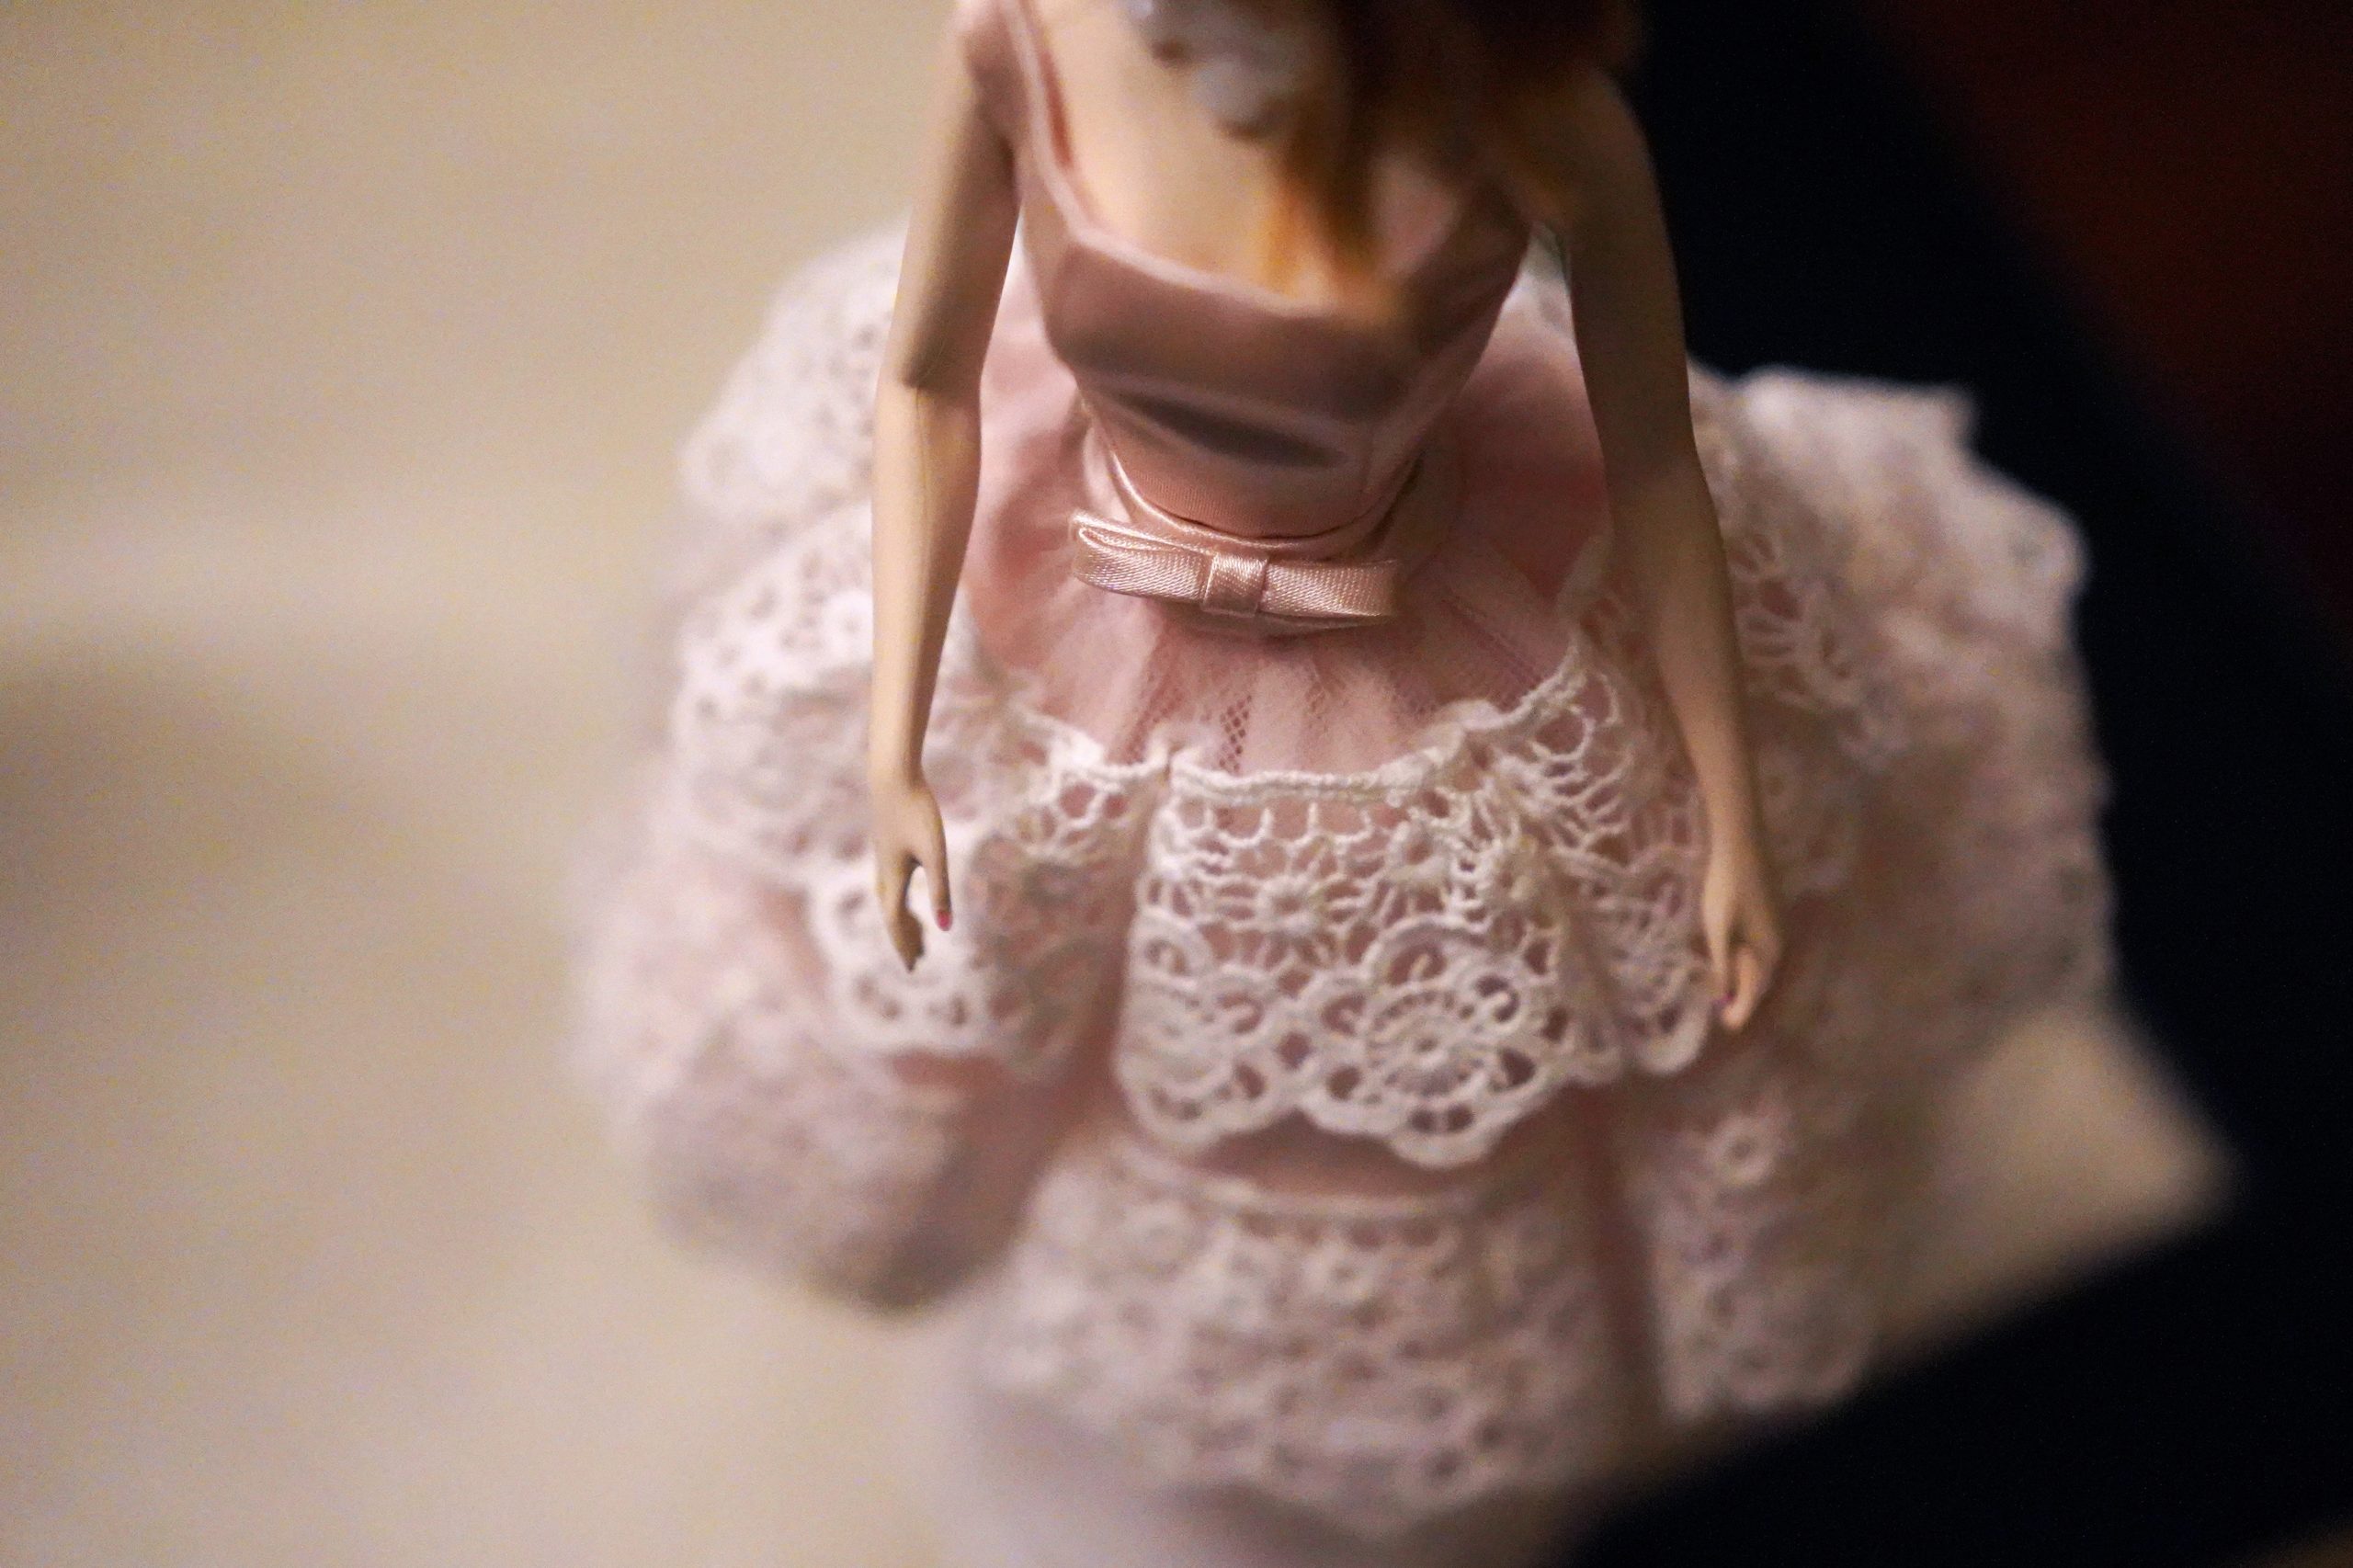 Barbie doll figure wearing pink dress with white lace in the skirt portion.